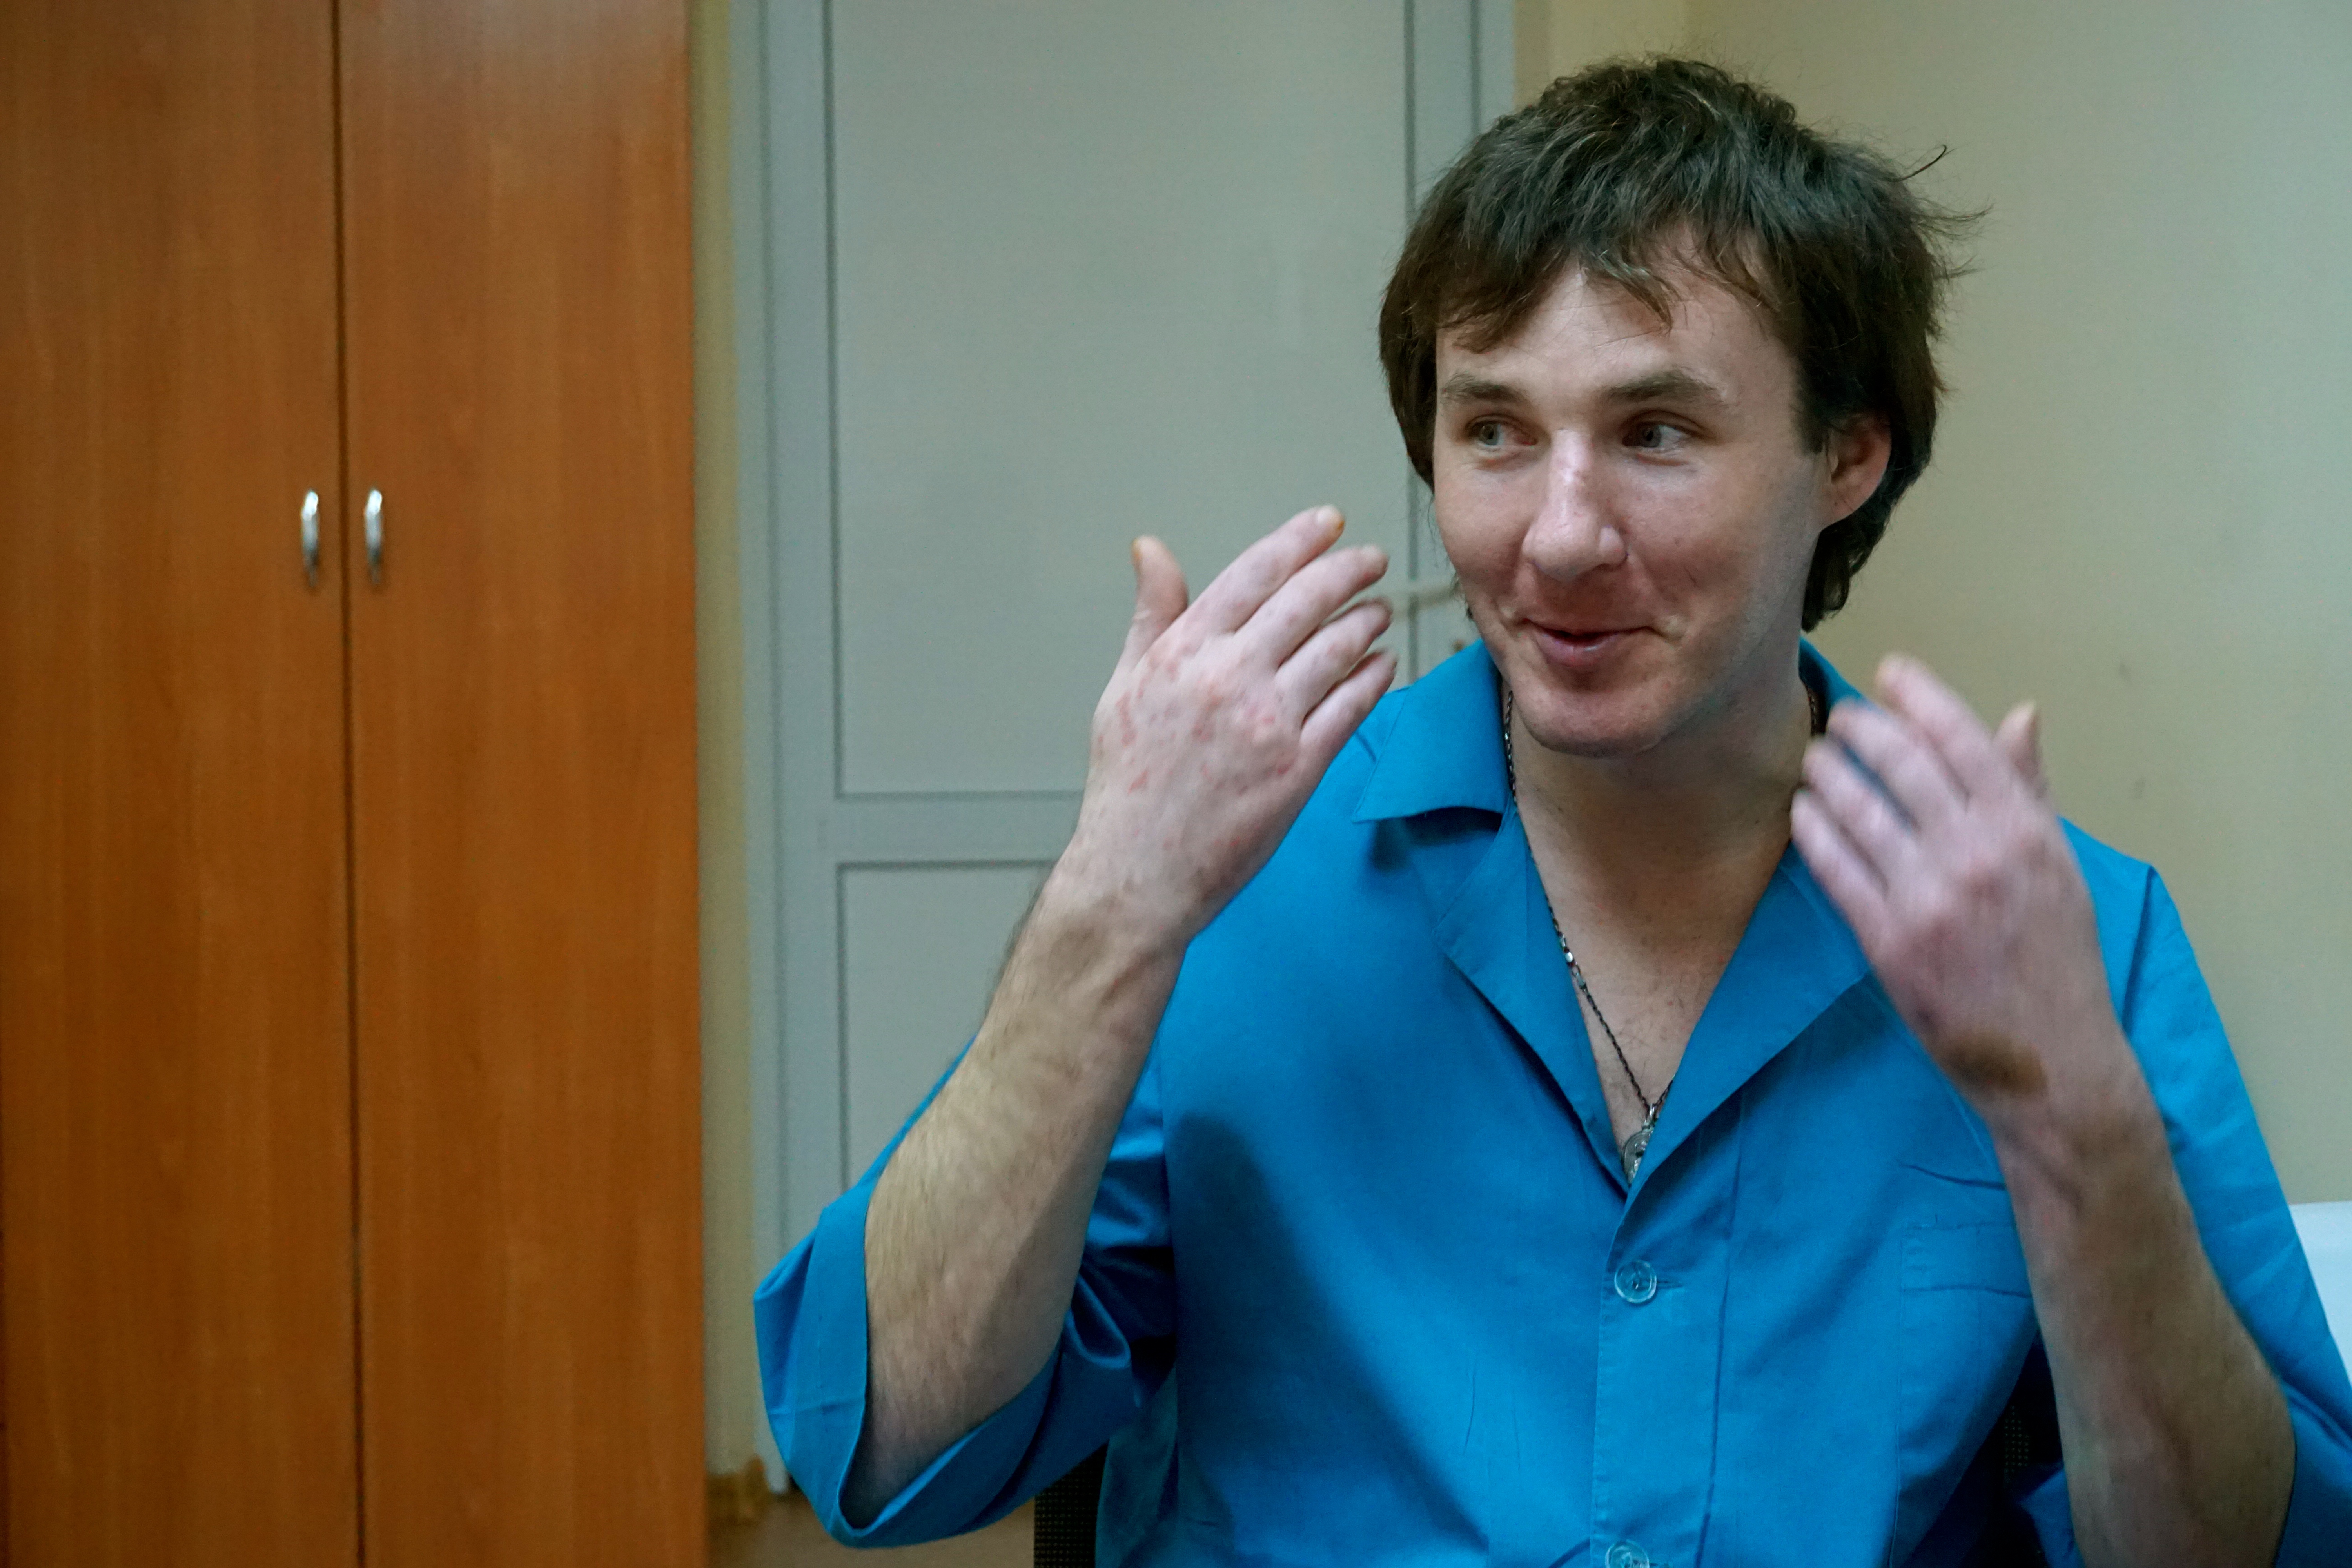 Krypychenko credited his religious faith and a good sense of humor with his ability to maintain hope throughout his captivity. (Photo: Nolan Peterson/The Daily Signal)